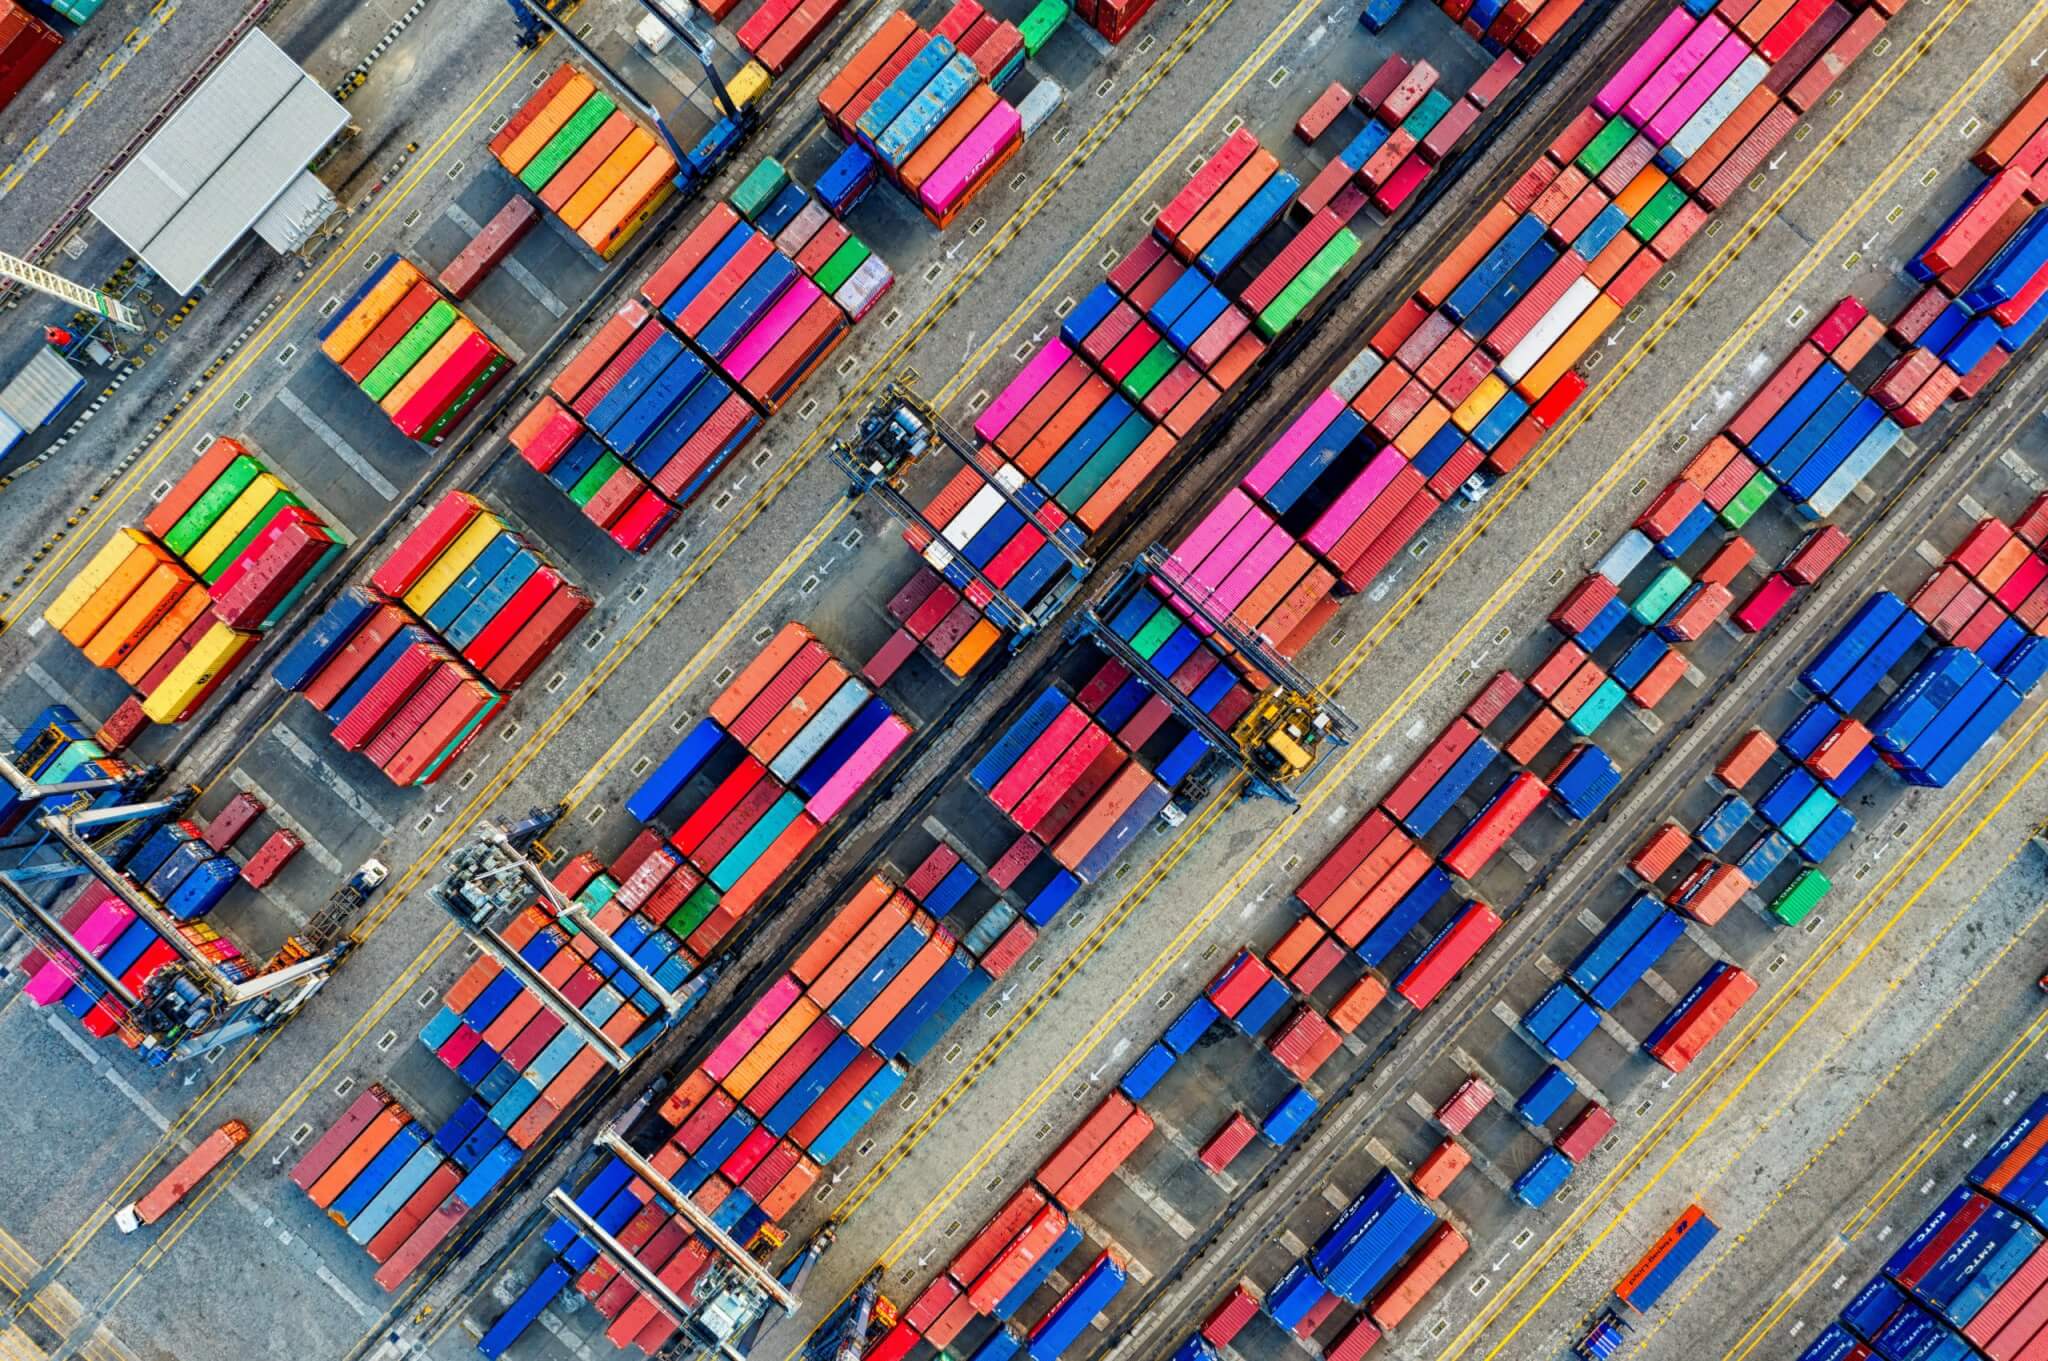 A birds eye view of shipping containers.